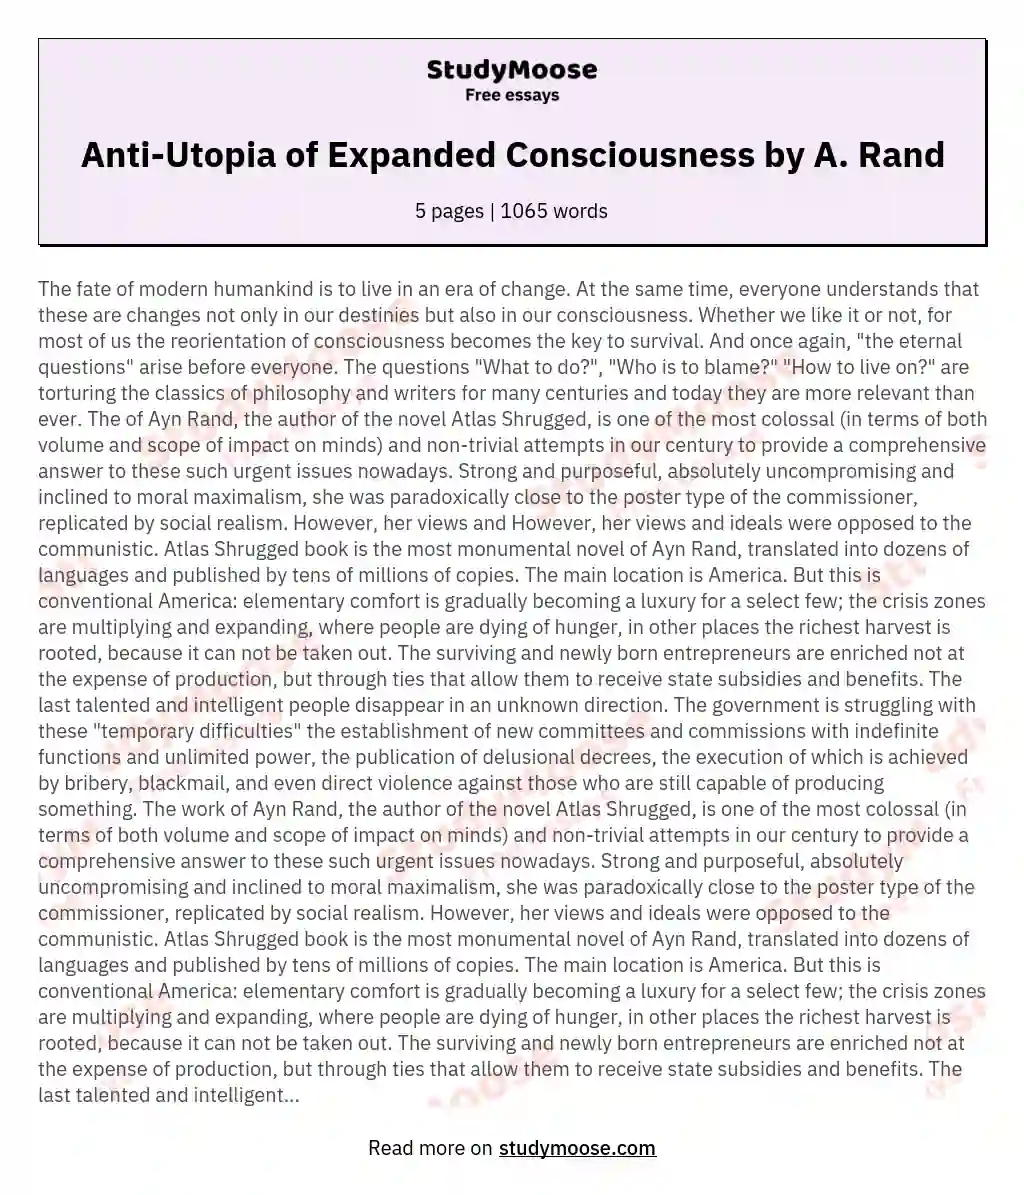 Anti-Utopia of Expanded Consciousness by A. Rand essay